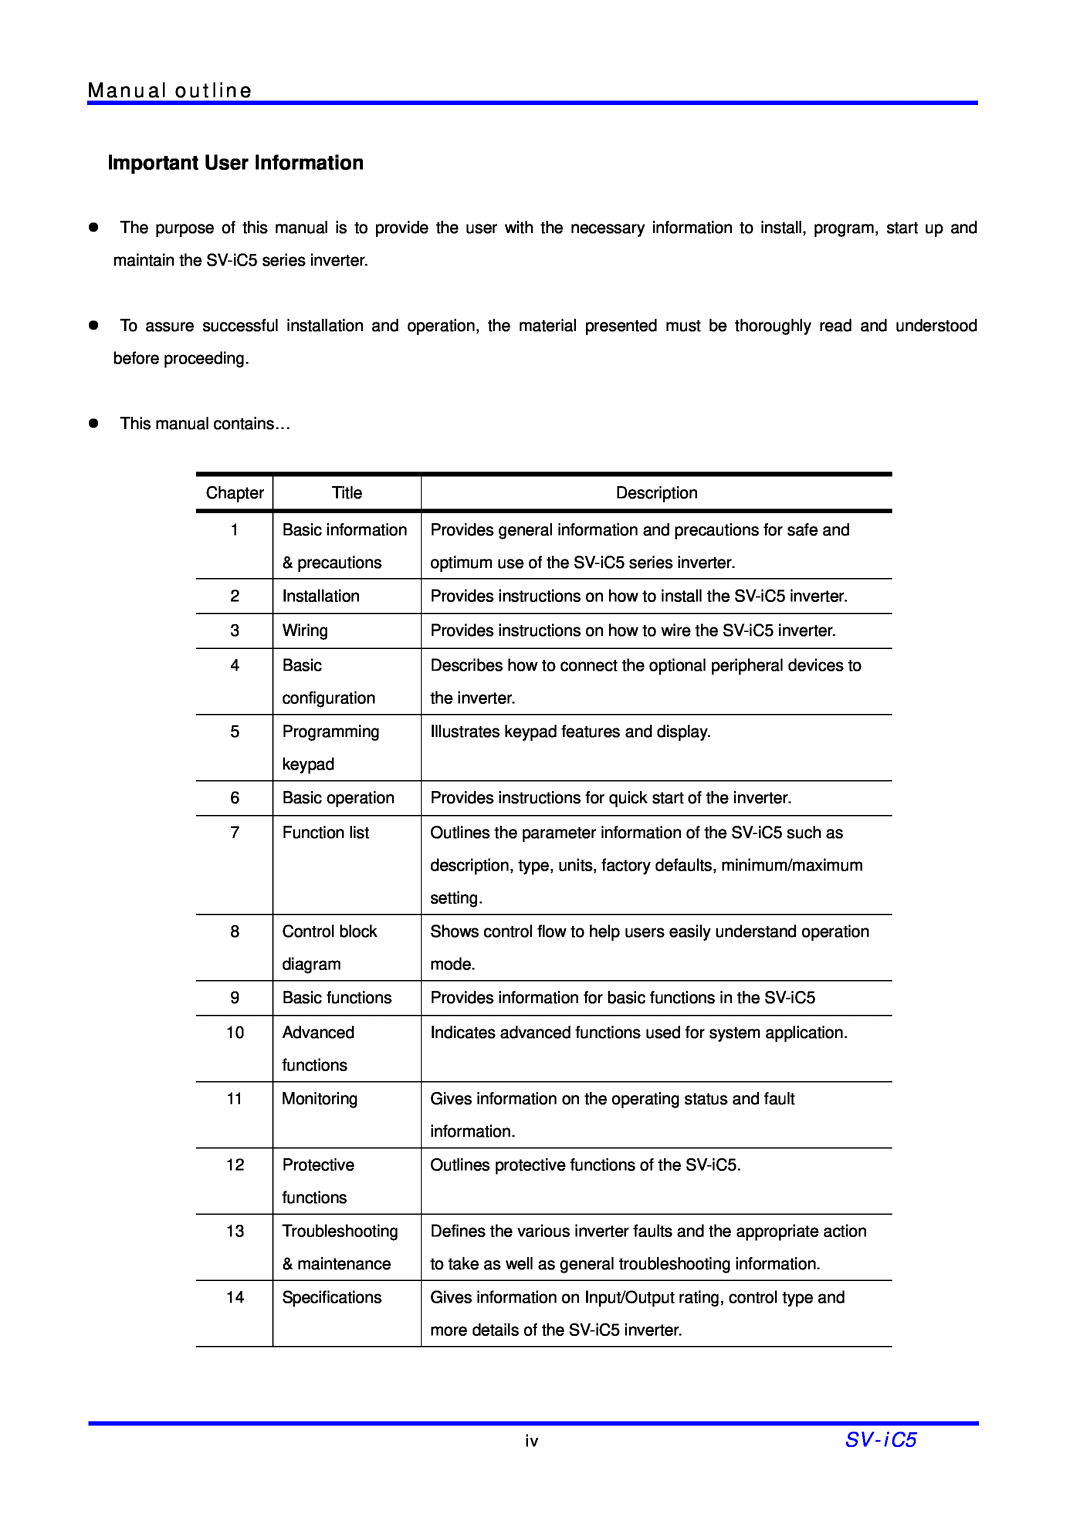 LG Electronics SV-iC5 Series manual Manual outline, Important User Information 